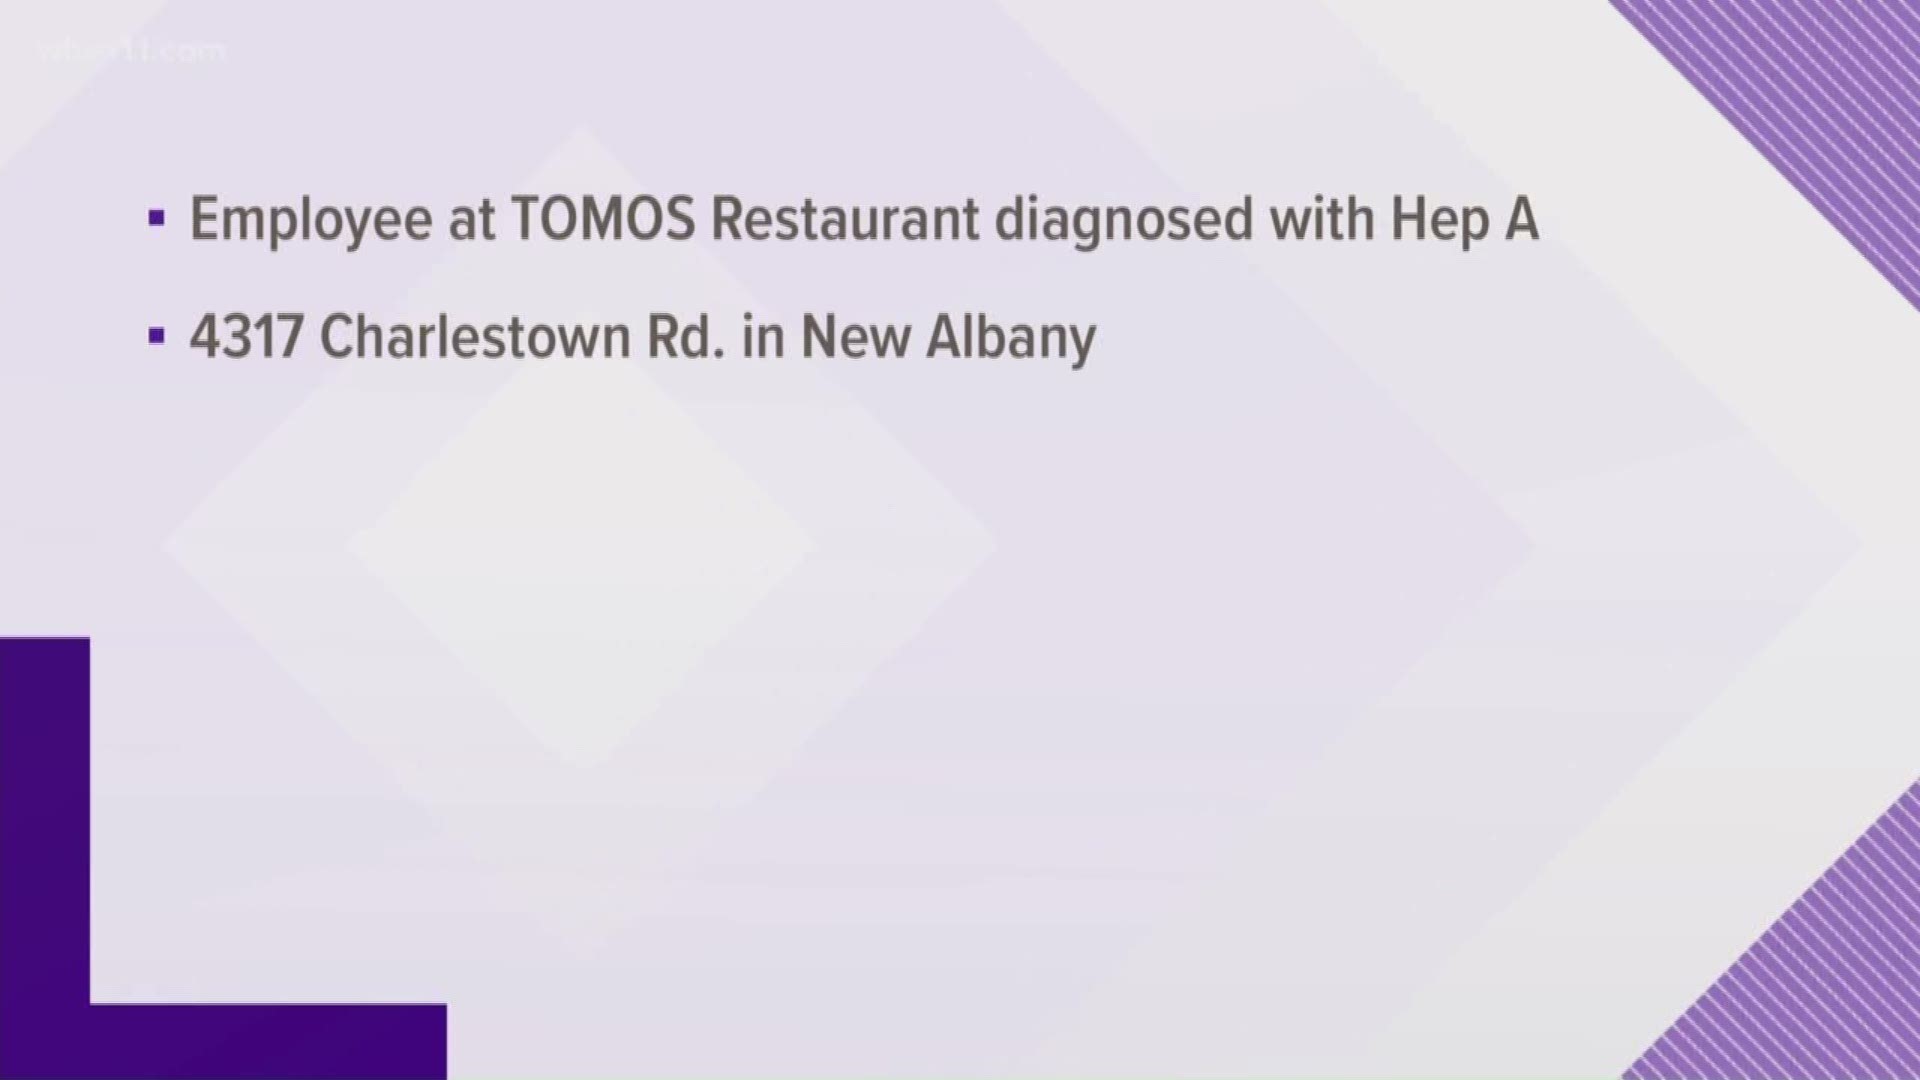 New Hep A case at New Albany restaurant